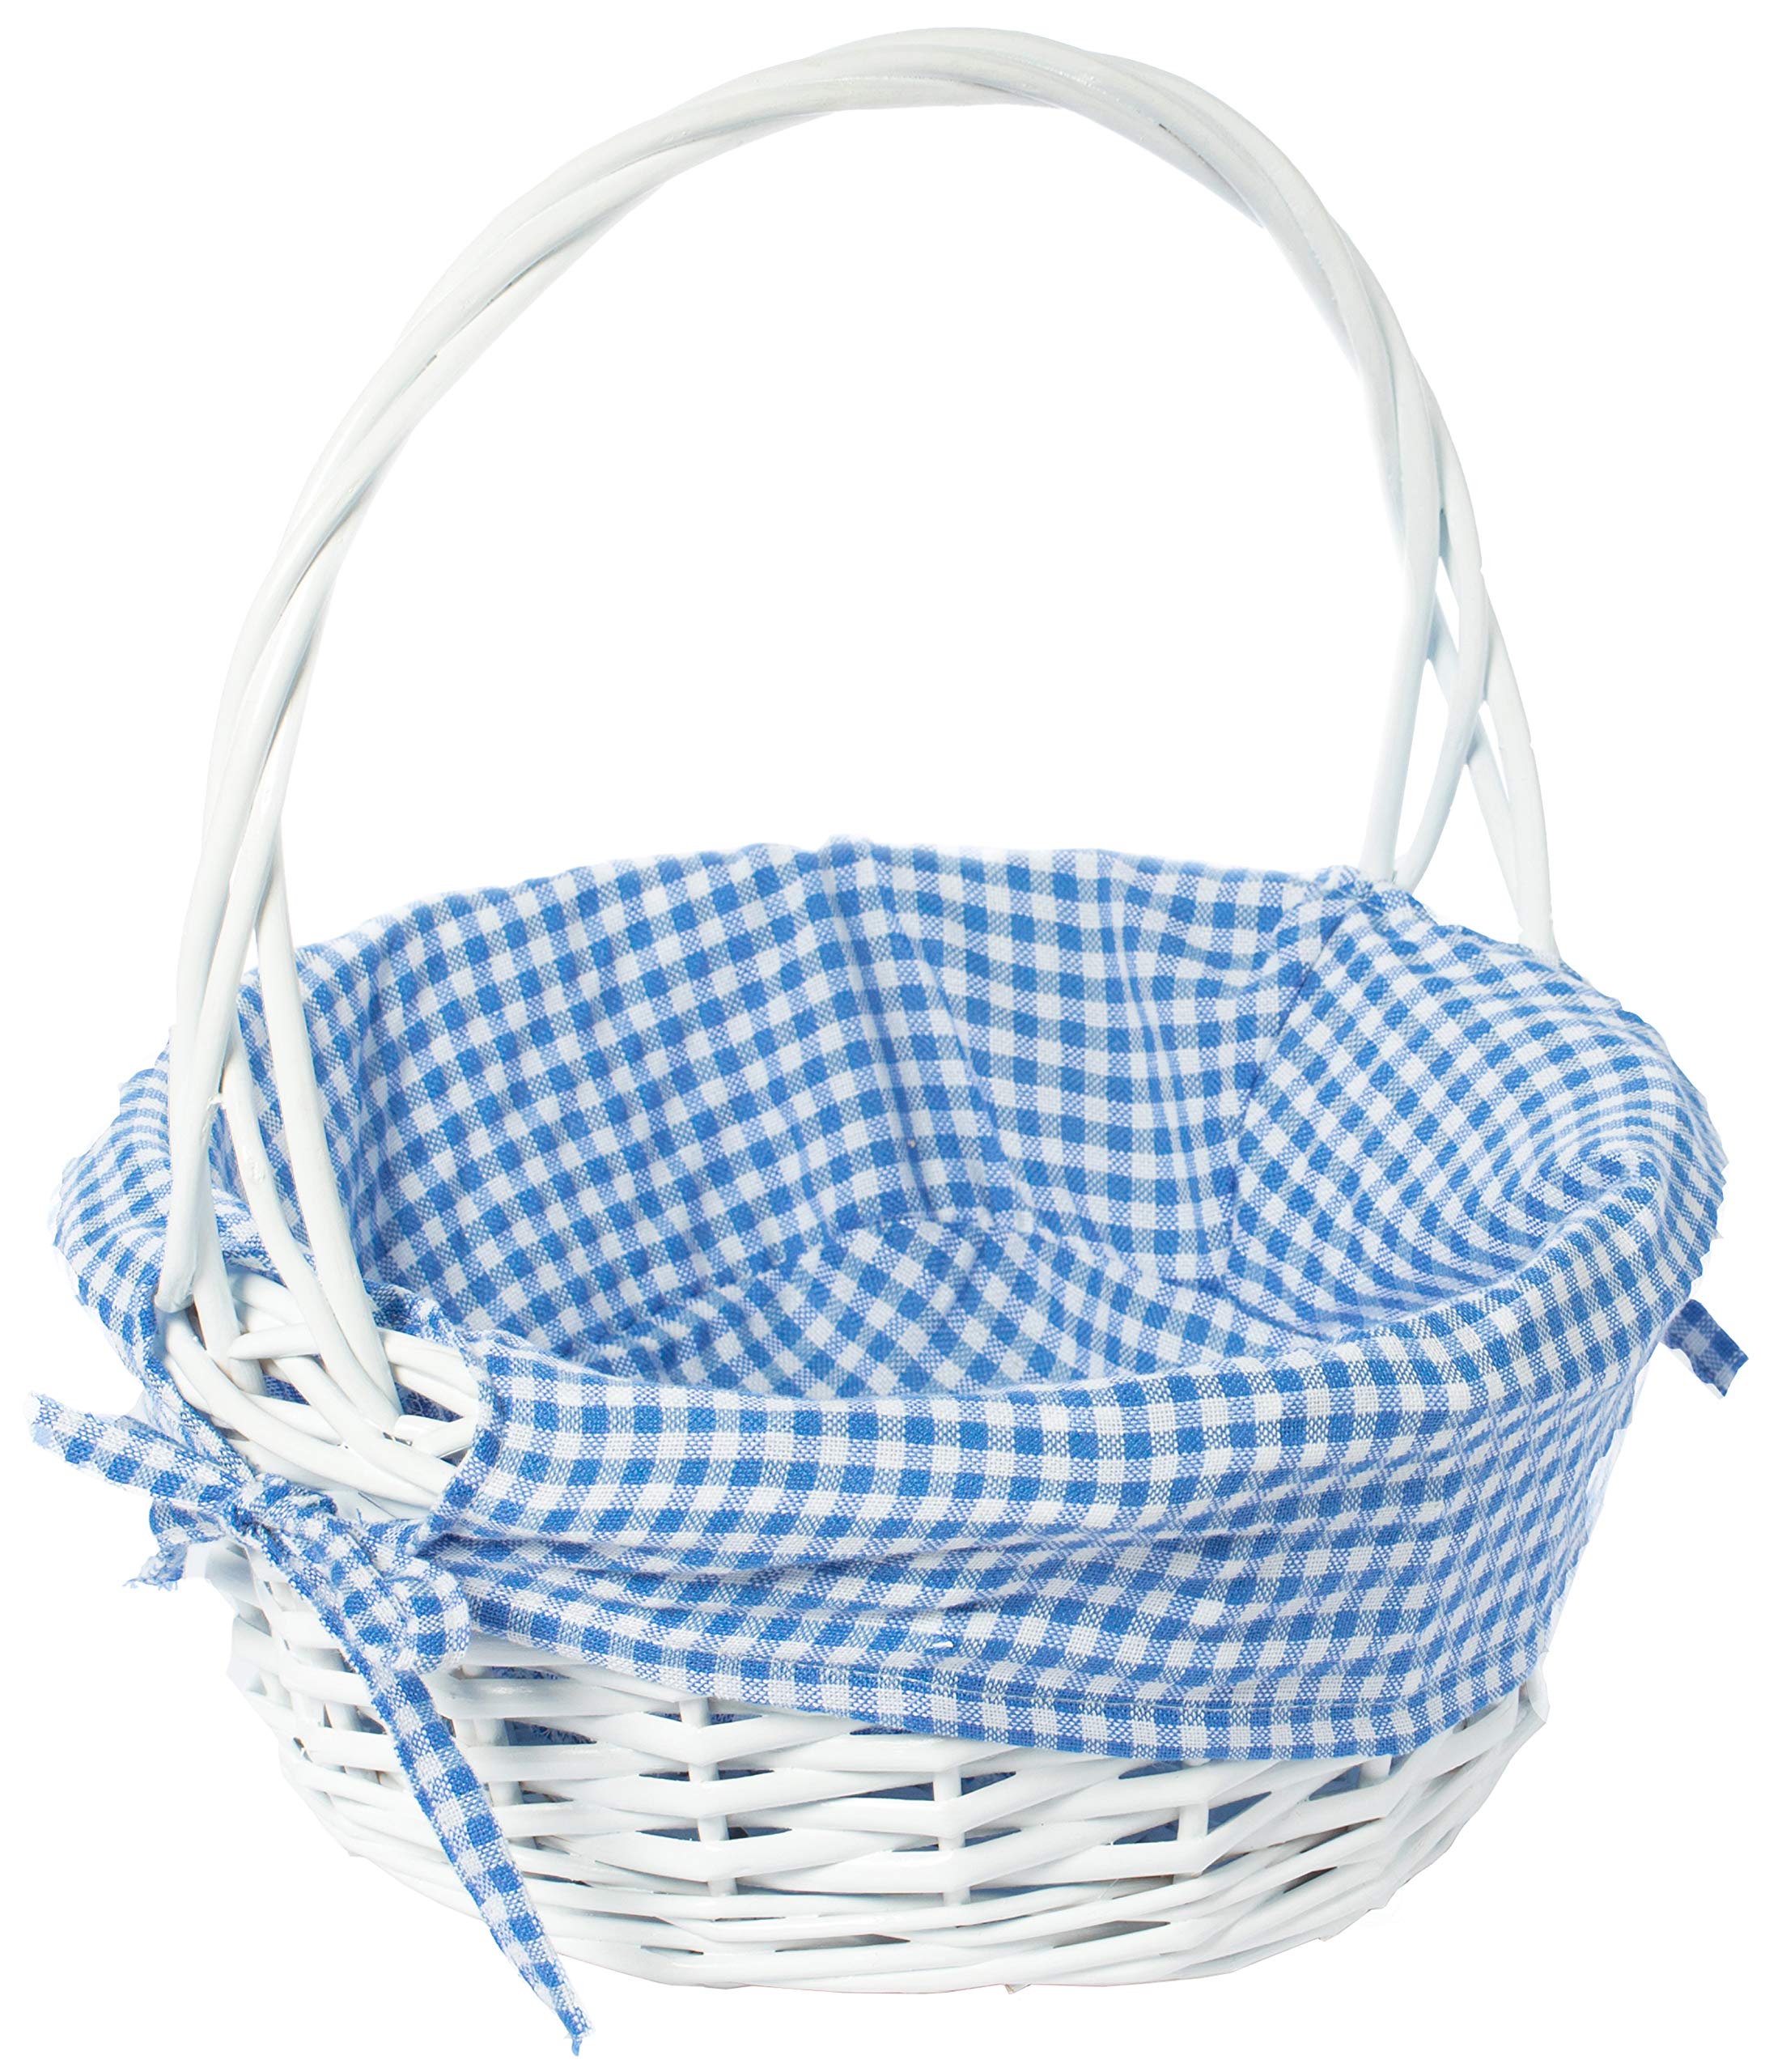 Vintiquewise White Round Willow Gift Basket, with Gingham Liner and Handle